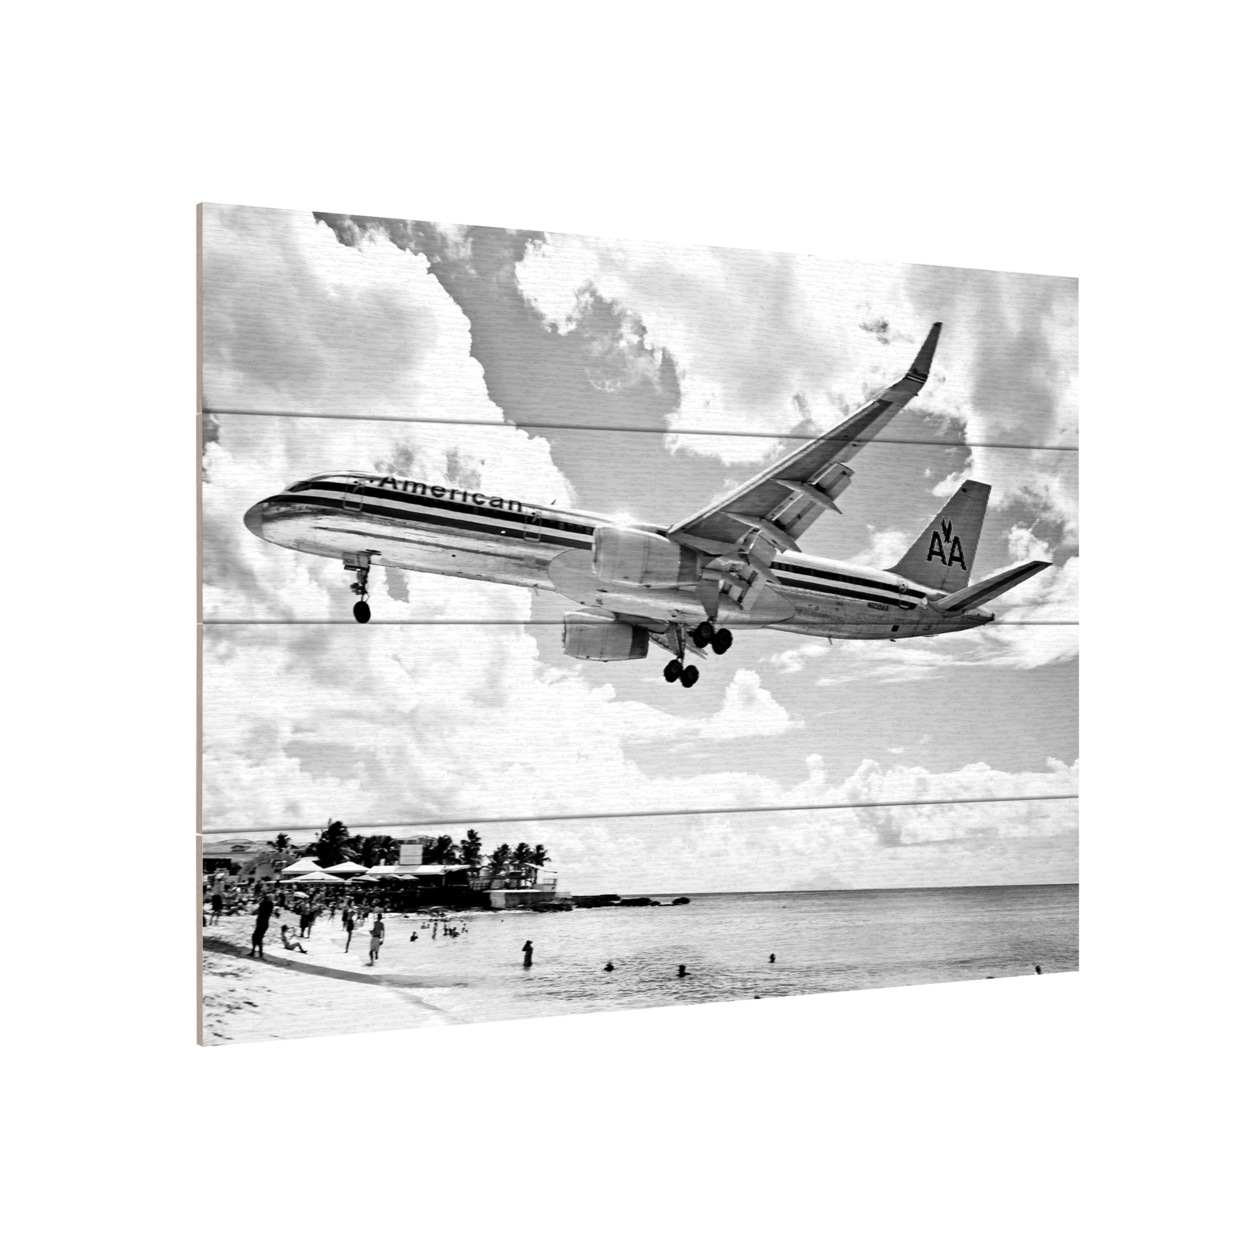 Wall Art 12 X 16 Inches Titled American Airliner Ready To Hang Printed On Wooden Planks